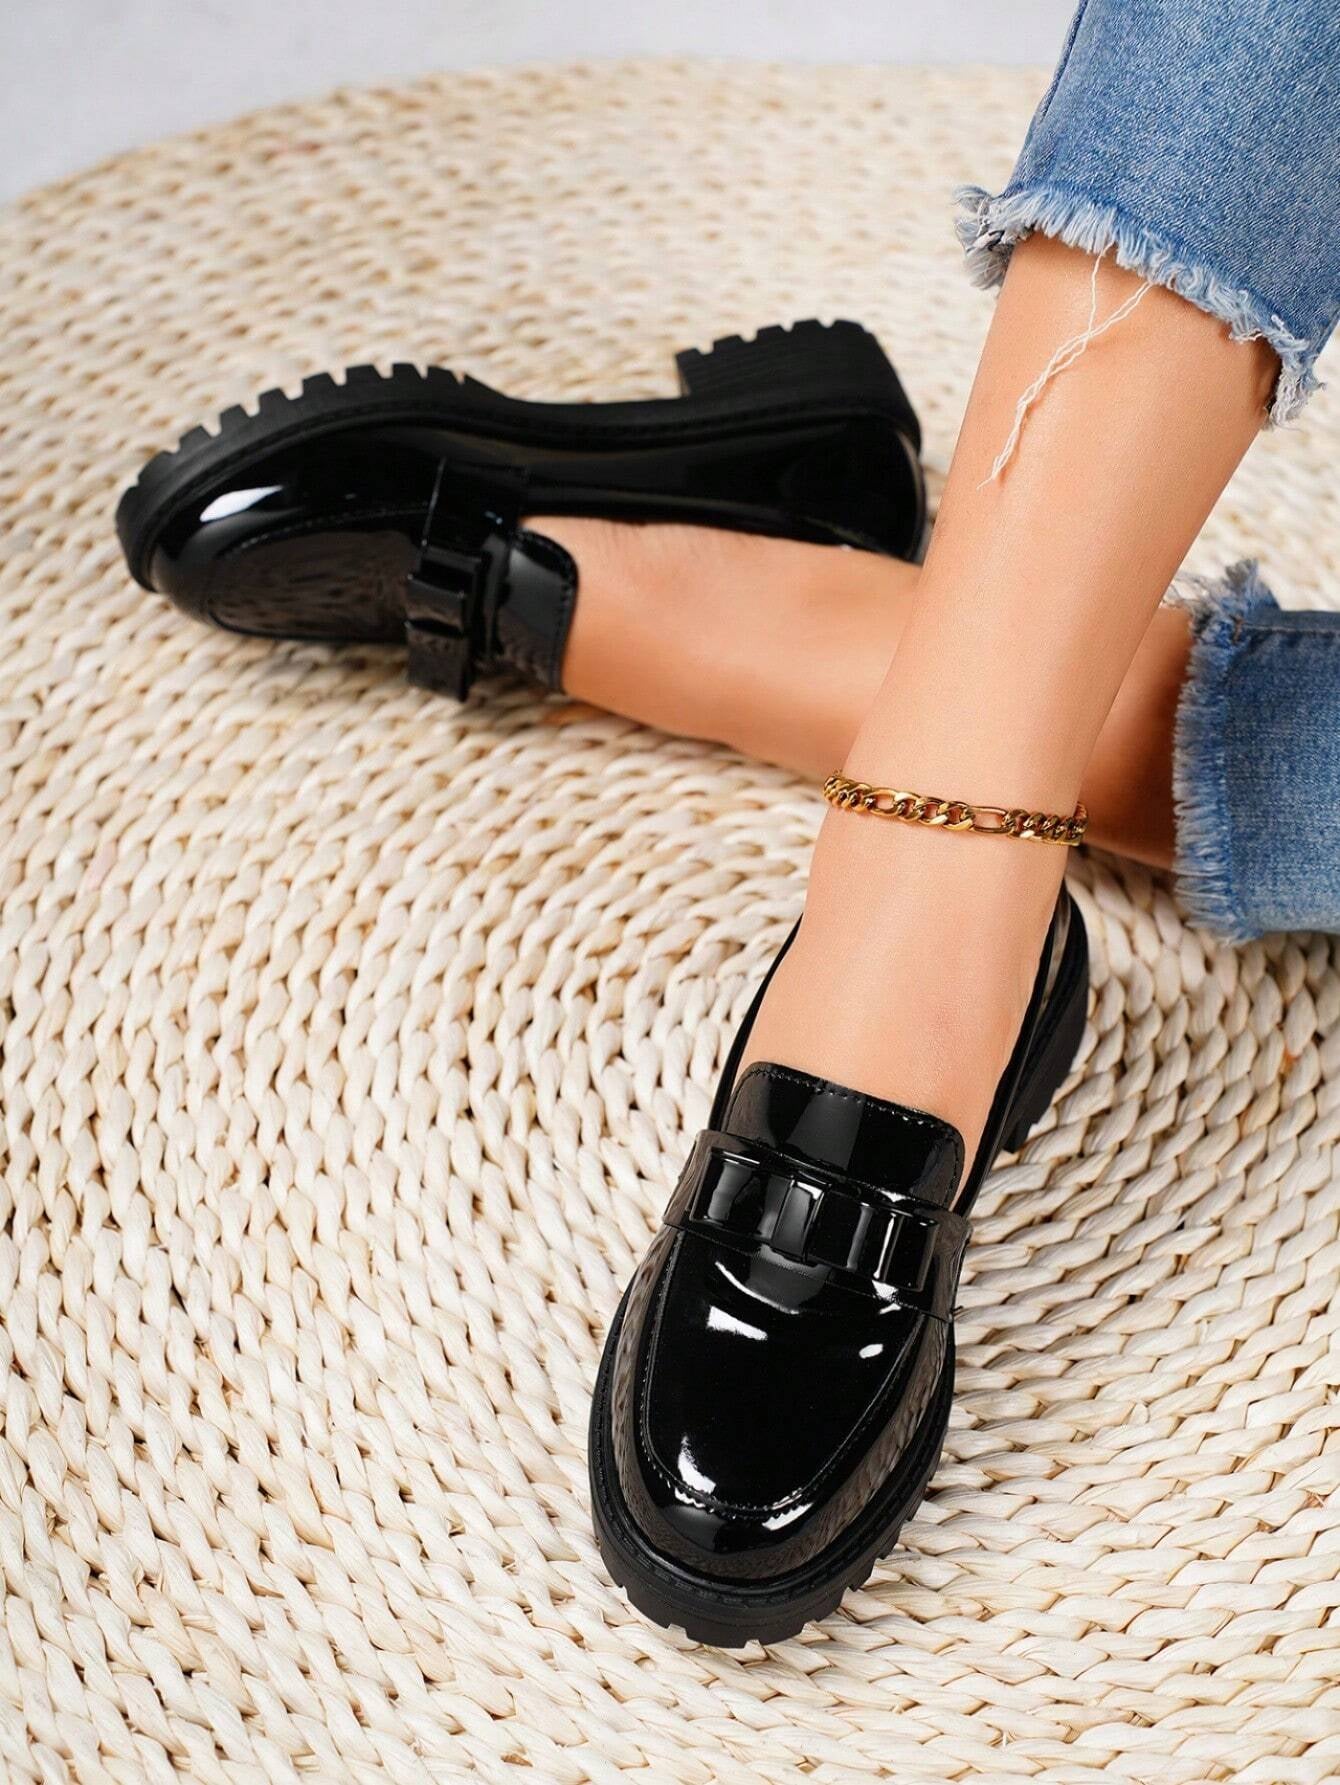 Chunky Heel & High Leather Loafers With Bow Tie Design Pumps